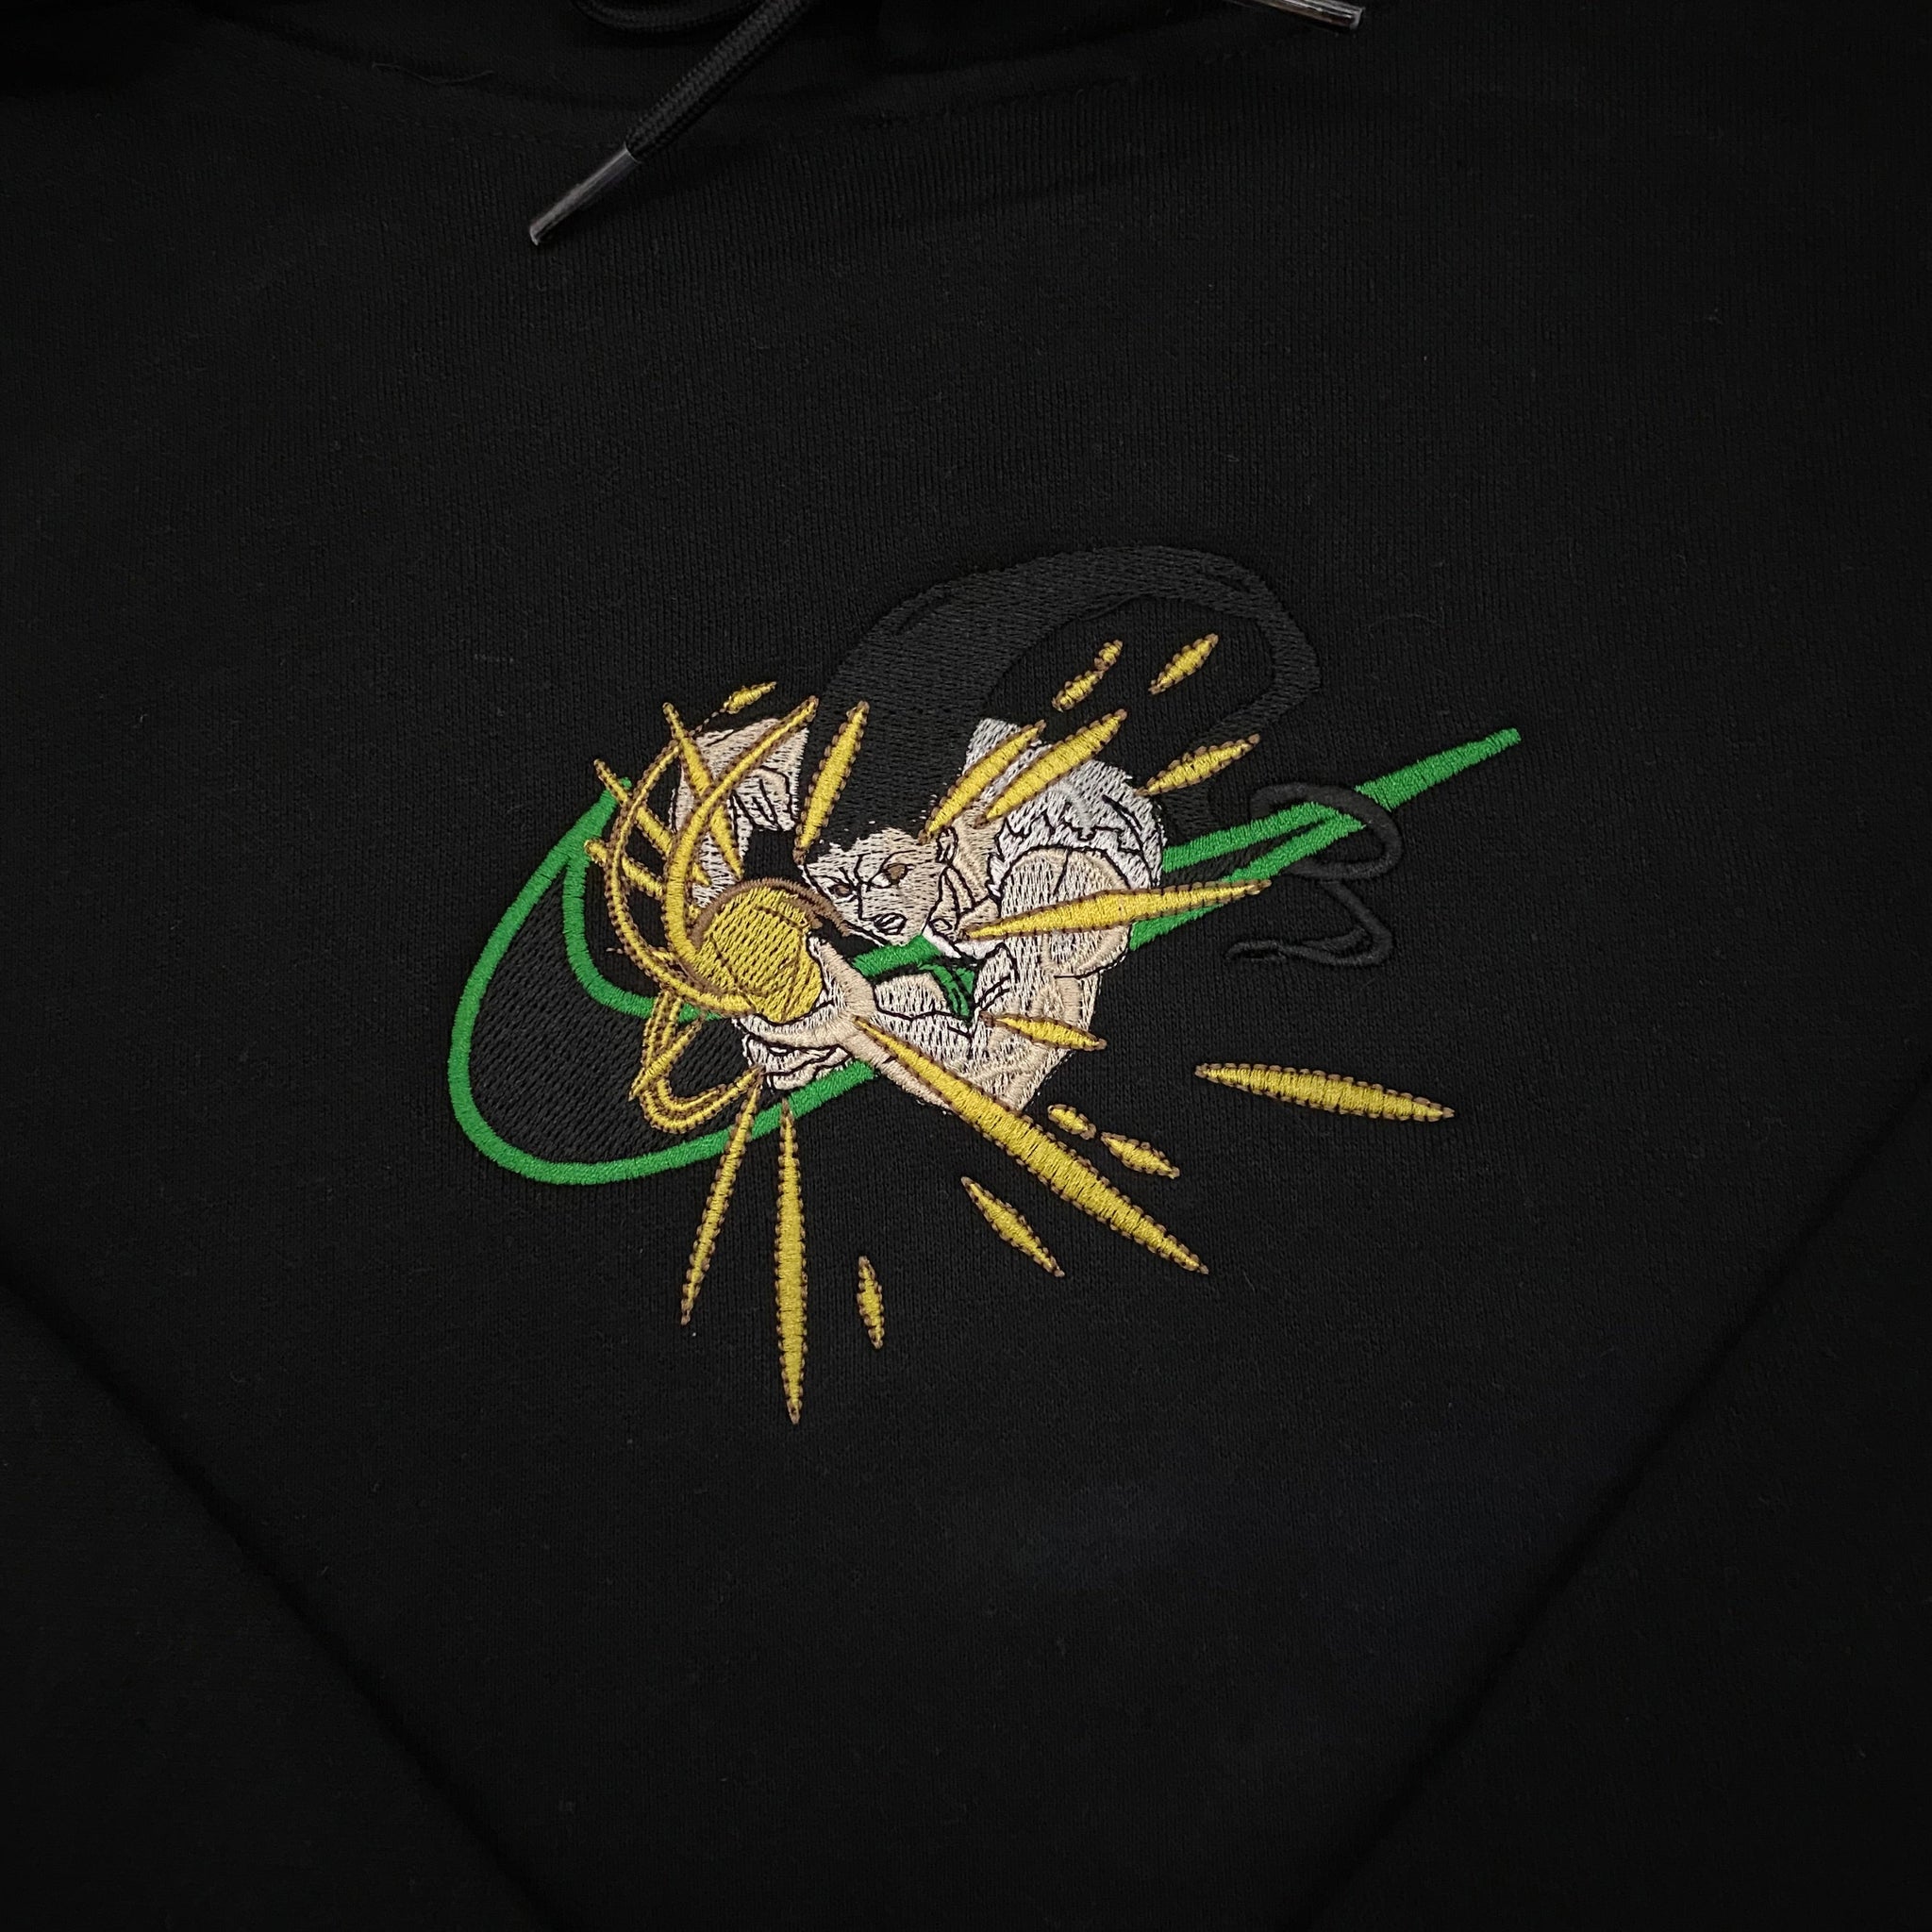 LIMITED HUNTER X HUNTER ADULT GON EMBROIDERED HOODIE